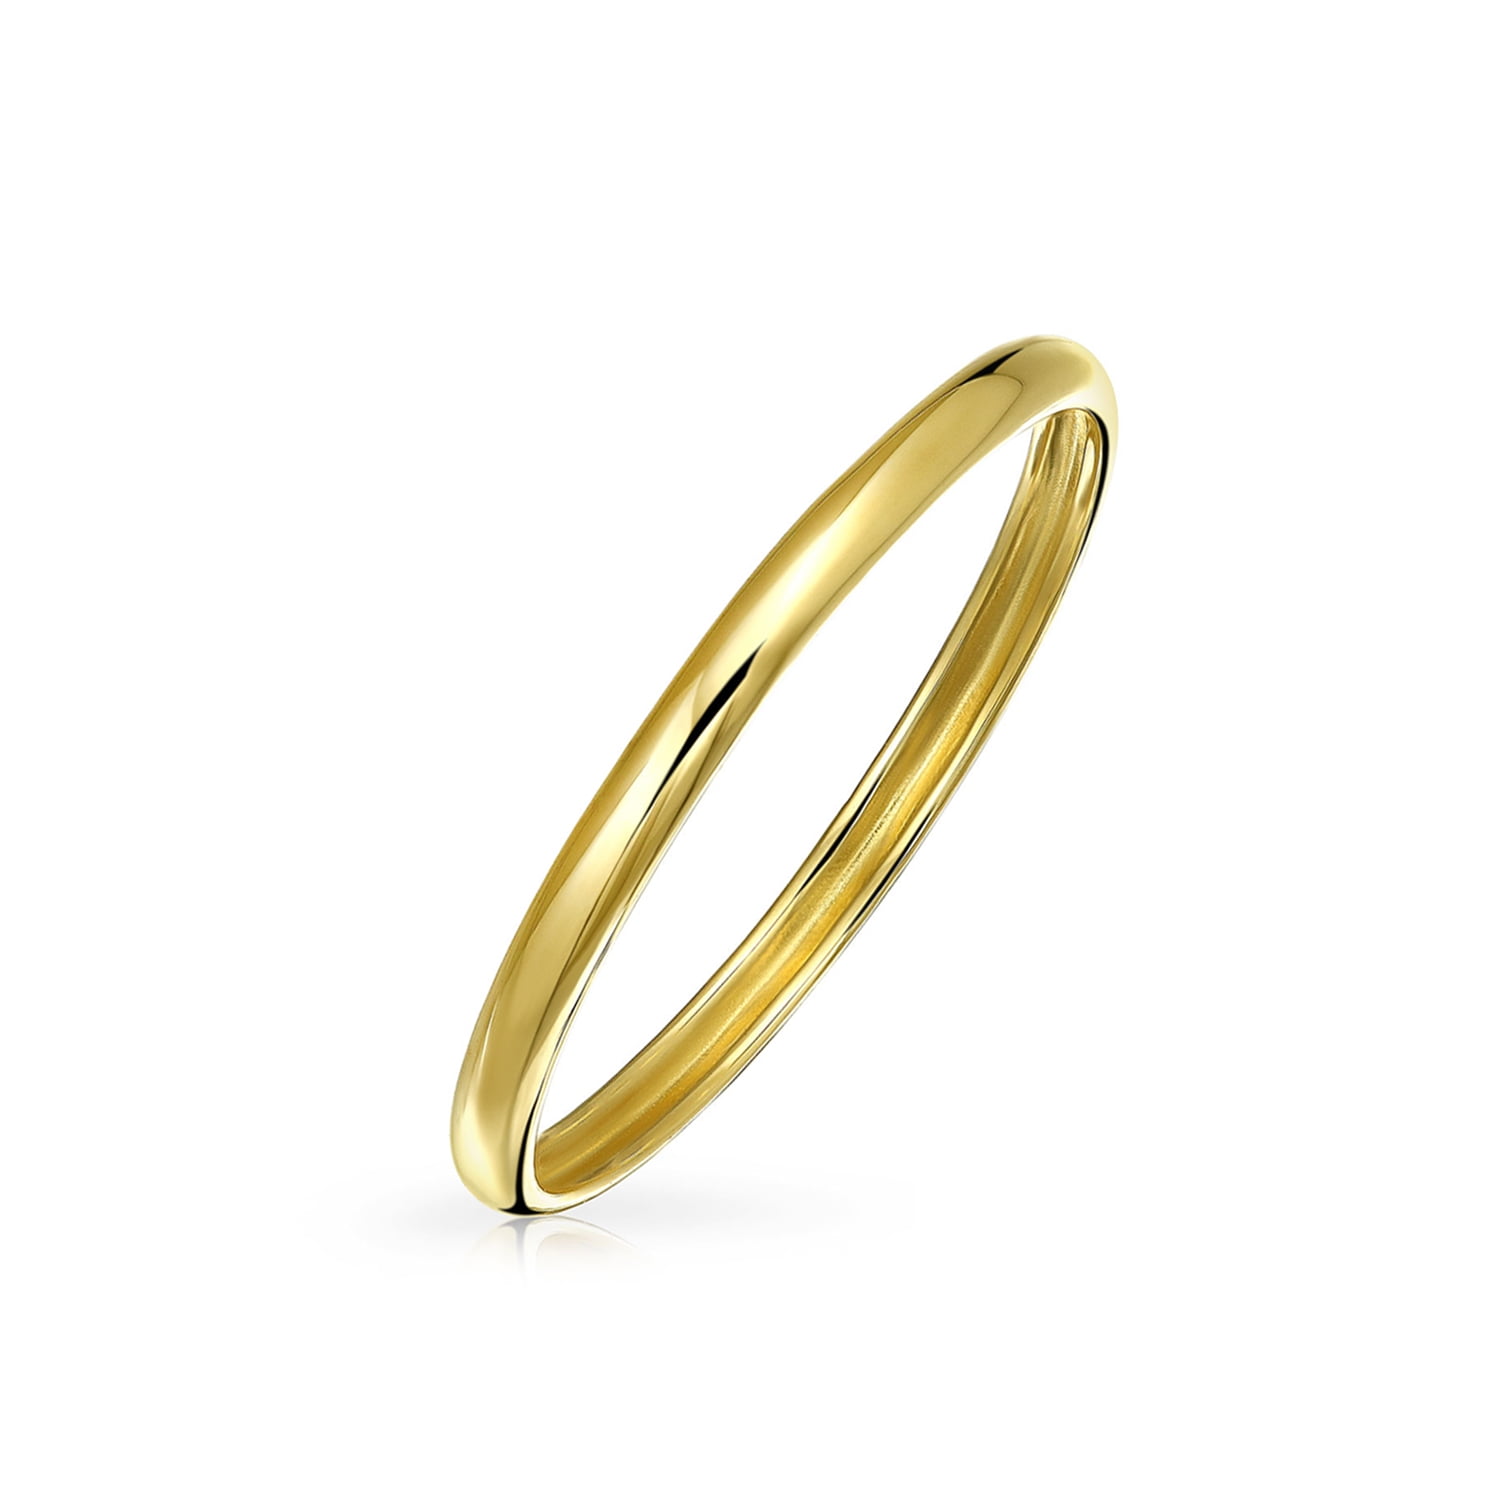 1mm Thin Domed Wedding Band in 14K White Gold